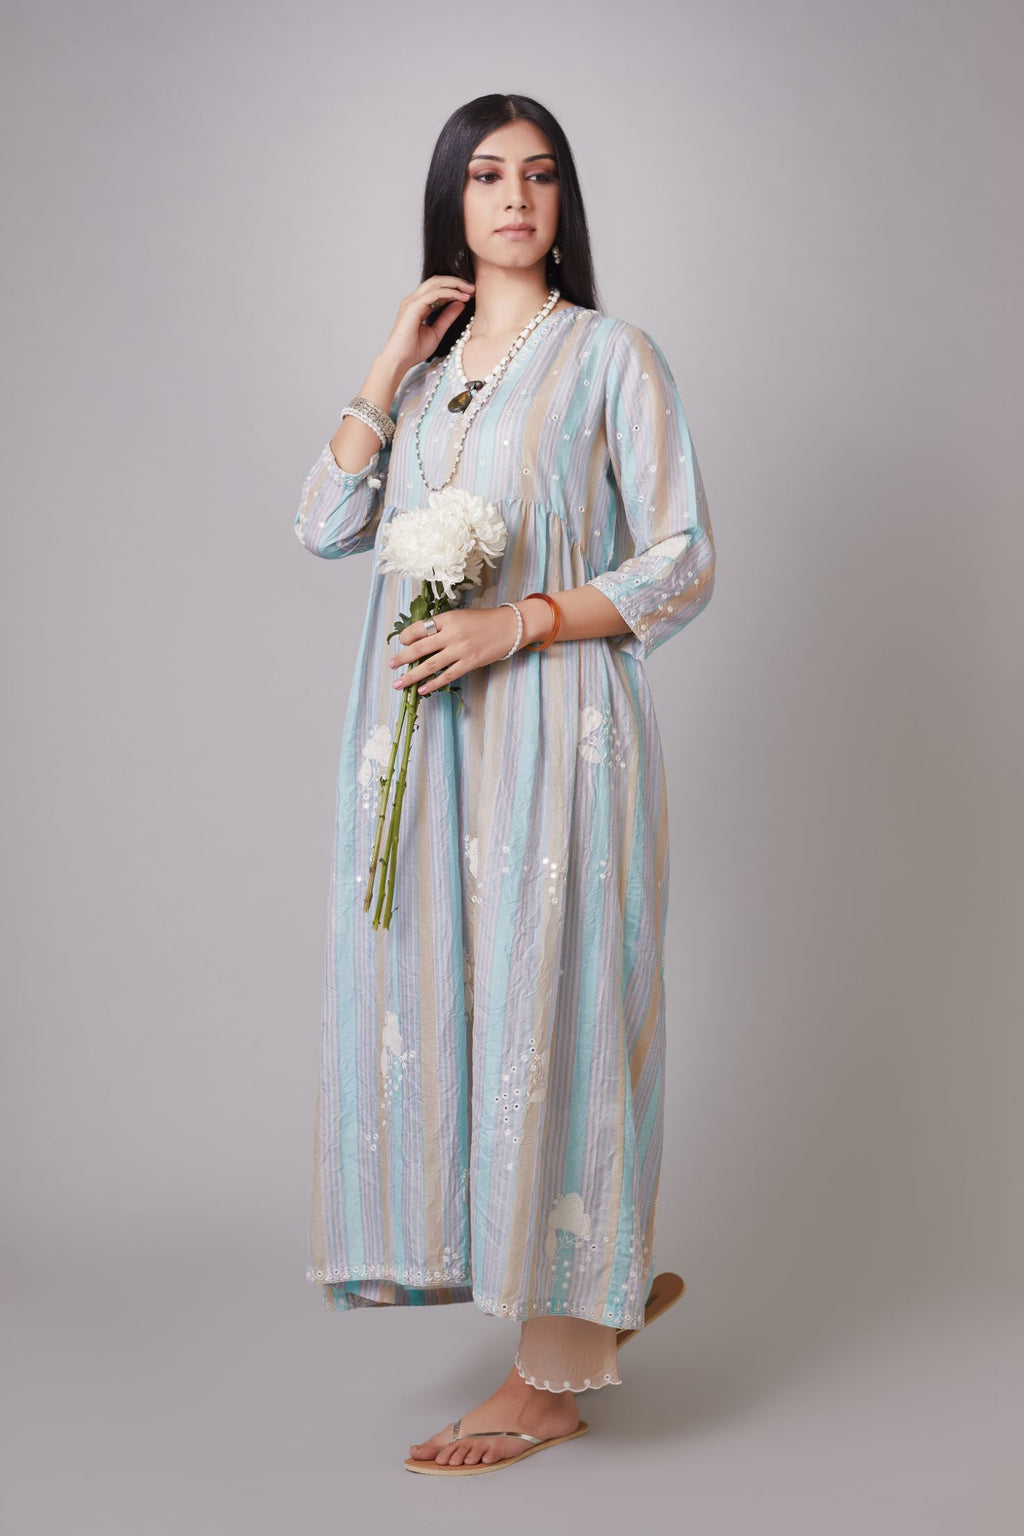 Multi striped hand-crushed silk kurta set with wavy empire waistline and gathers, highlighted with applique flower embroidery and mirror hand work.